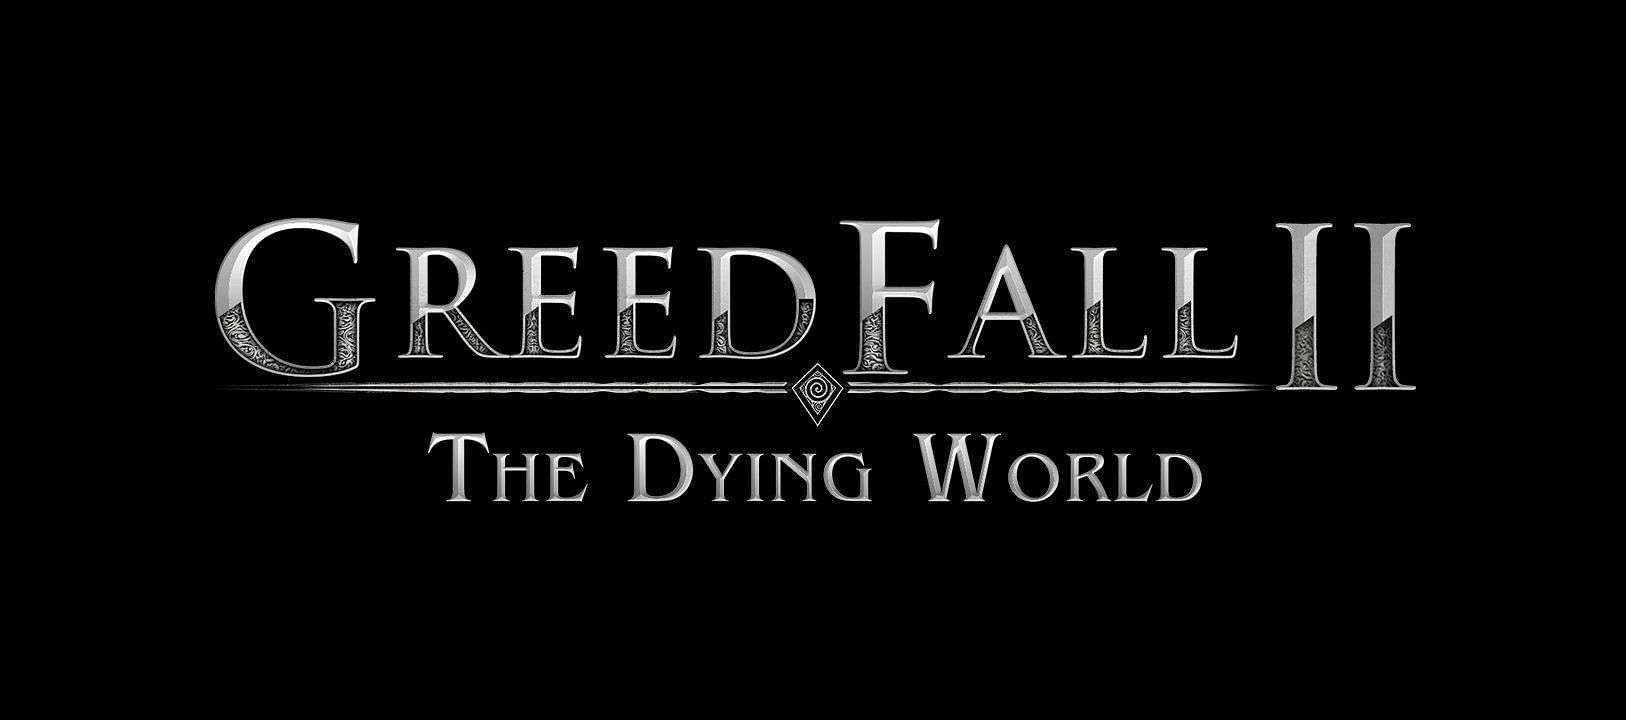 What to expect from GreedFall 2: The Dying World (Image via Twitter/Nibellion)